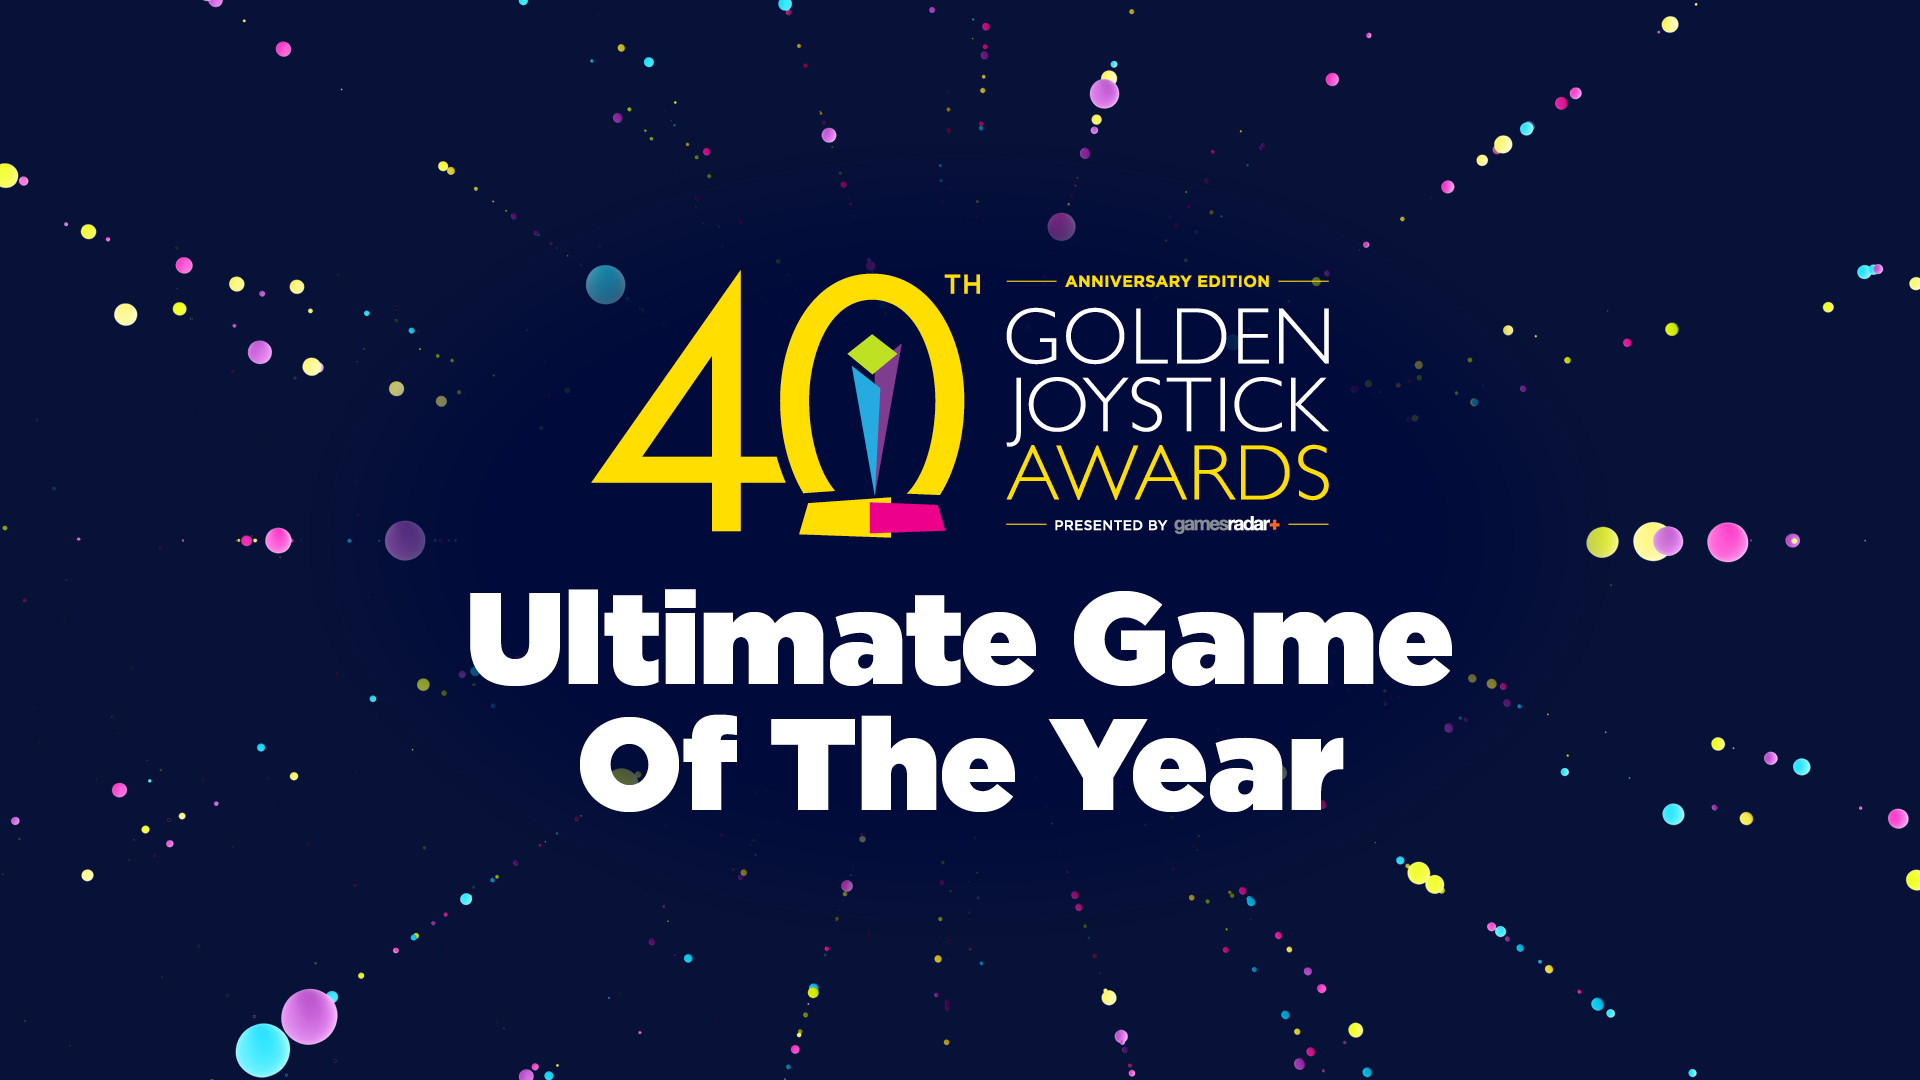 Elden Ring wins Game of the Year at 40th Golden Joystick Awards